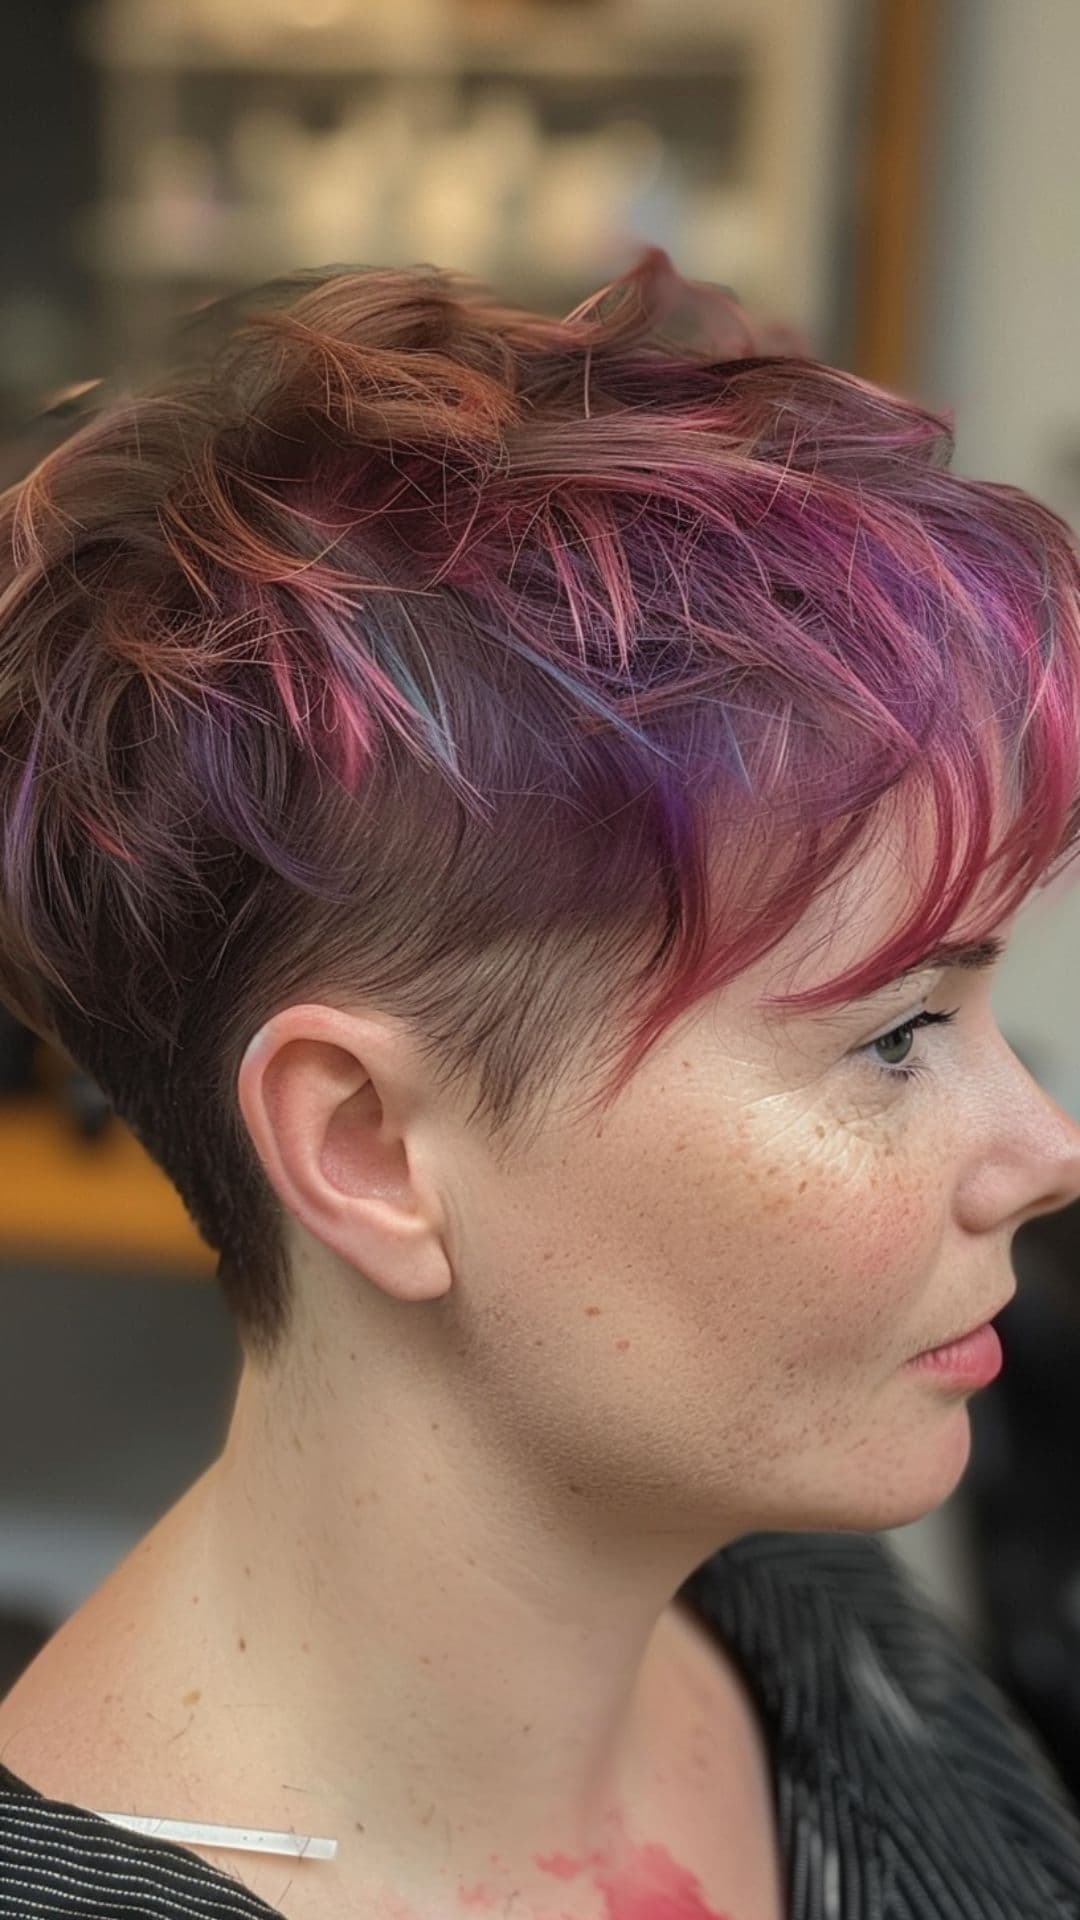 A woman modelling a pixie cut with pink and purple highlights.